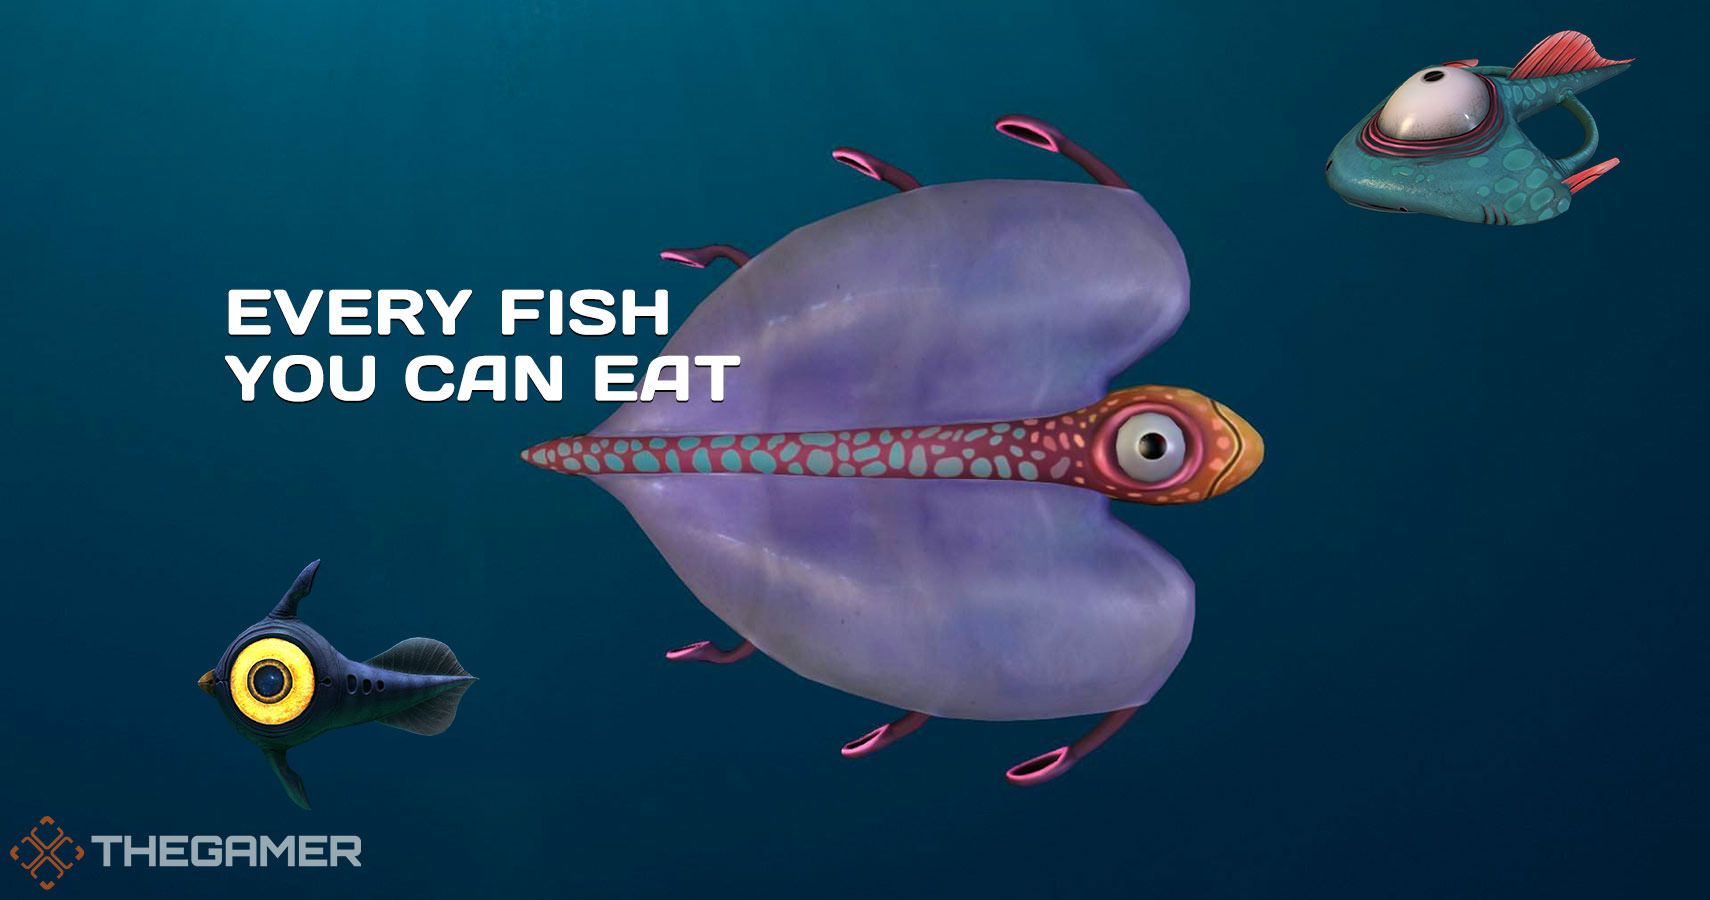 Subnautica: Every Fish You Can Eat